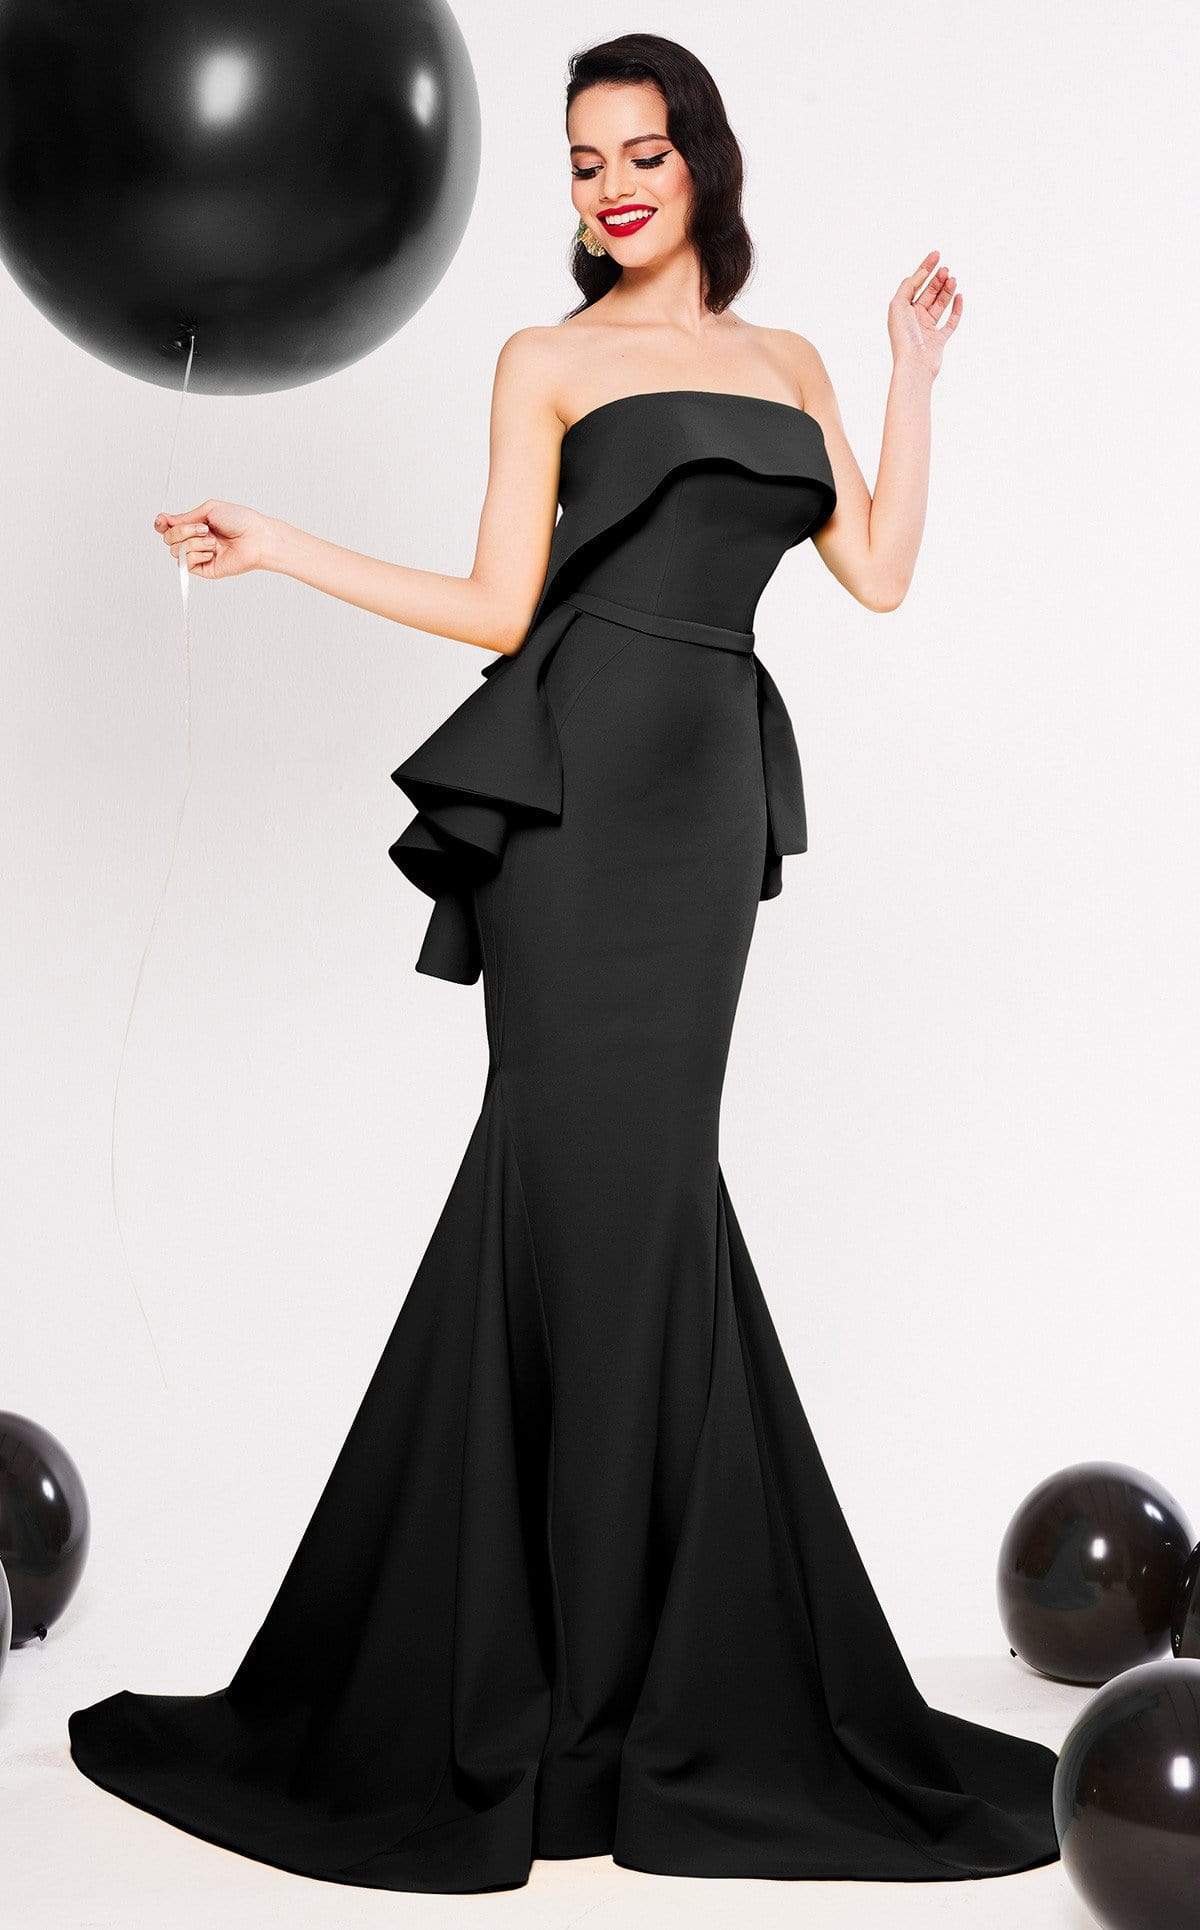 MNM COUTURE - N0325 Strapless Off Shoulder Ruffled Peplum Mermaid Gown Prom Dresses 4 / Black